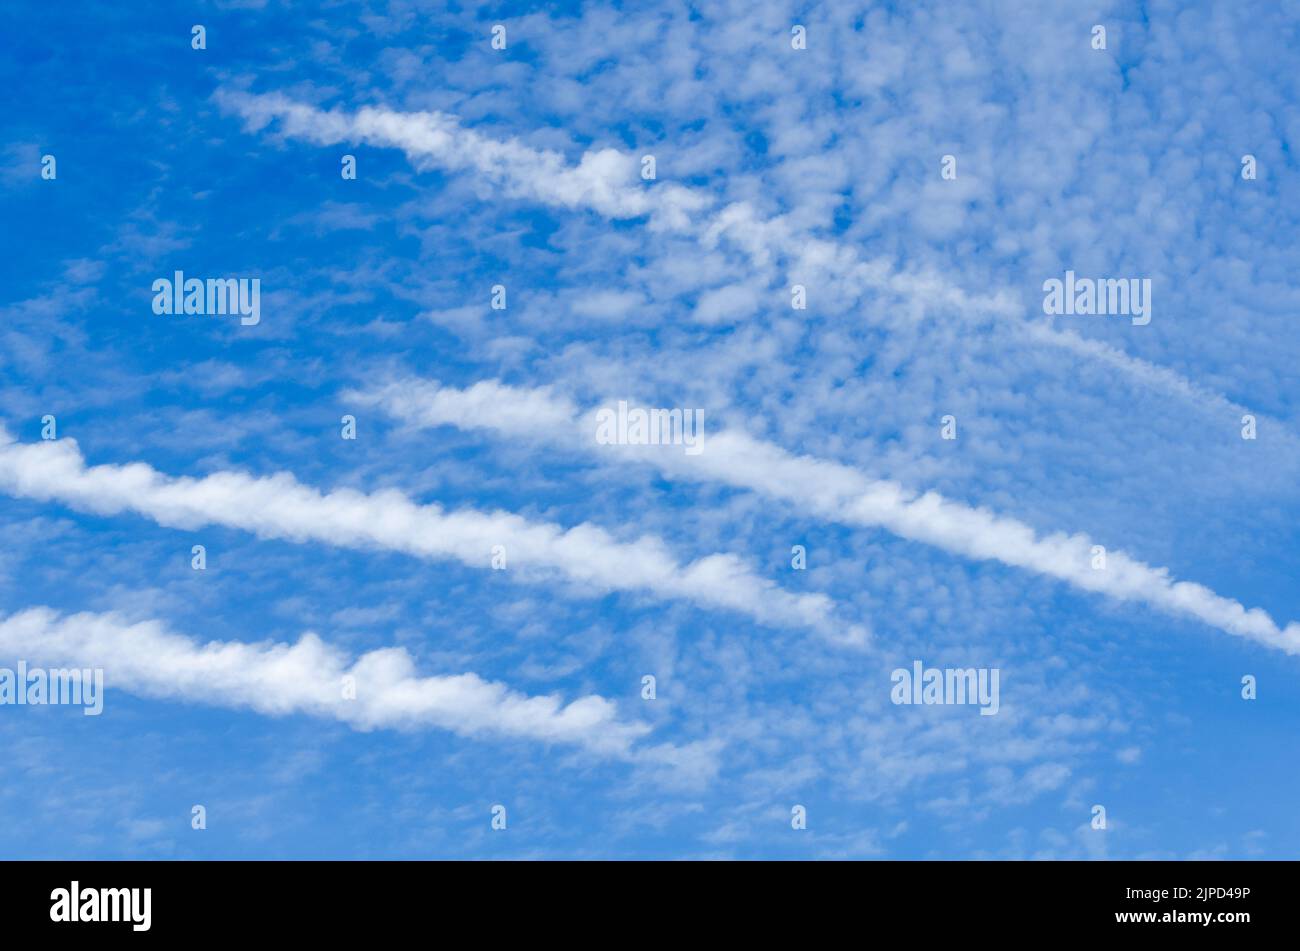 Condensation trails of aircraft and clouds in the blue sky Stock Photo